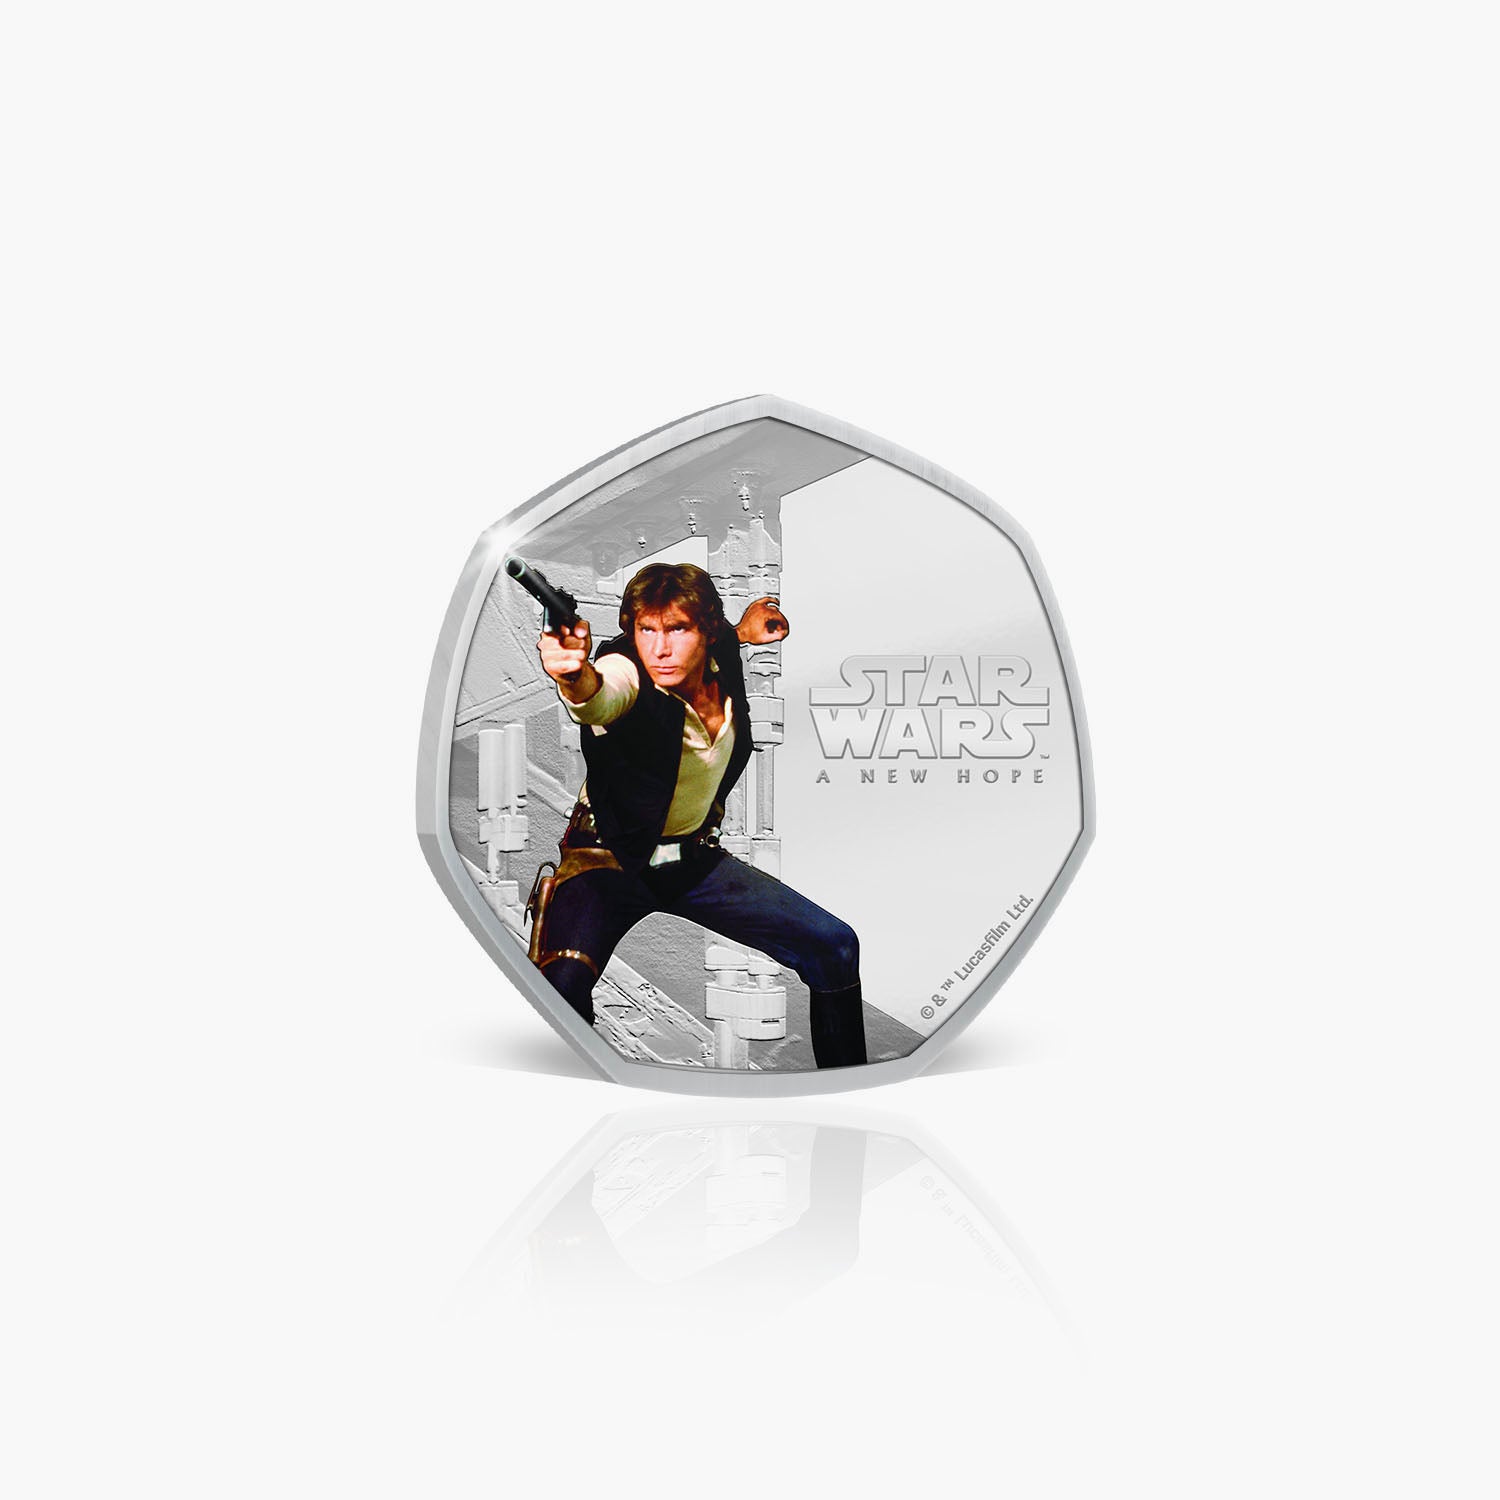 A New Hope - Han Solo Silver Plated Coin